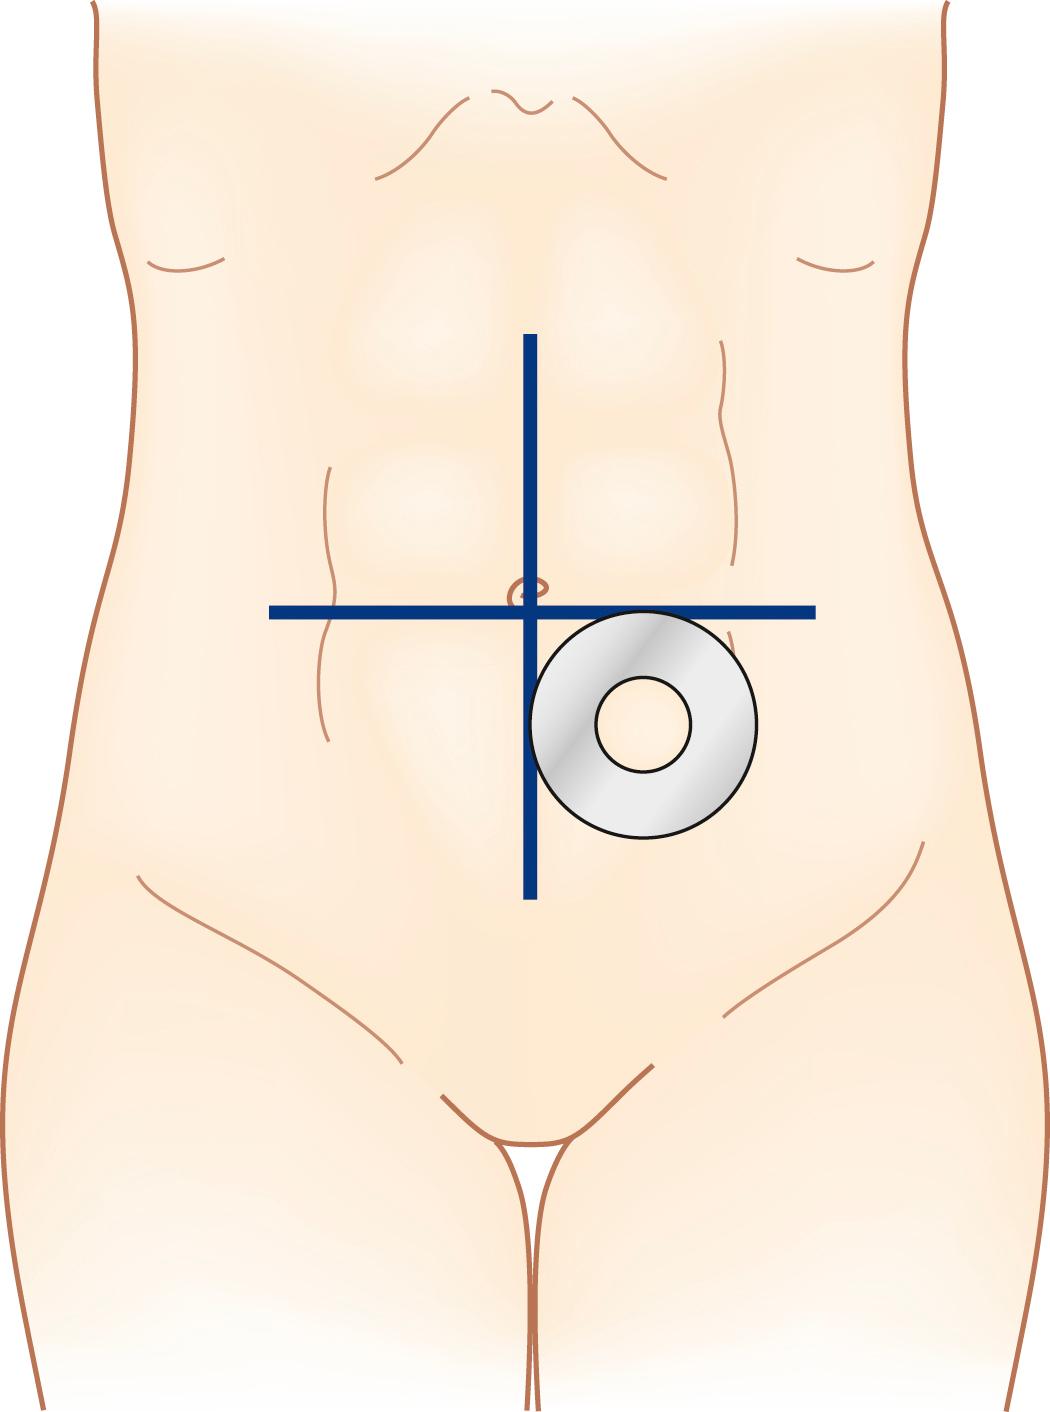 Fig. 52.15, Demonstration of the infraumbilical fat mound that is the ideal stoma site in many patients, here showing marking for a descending colostomy.